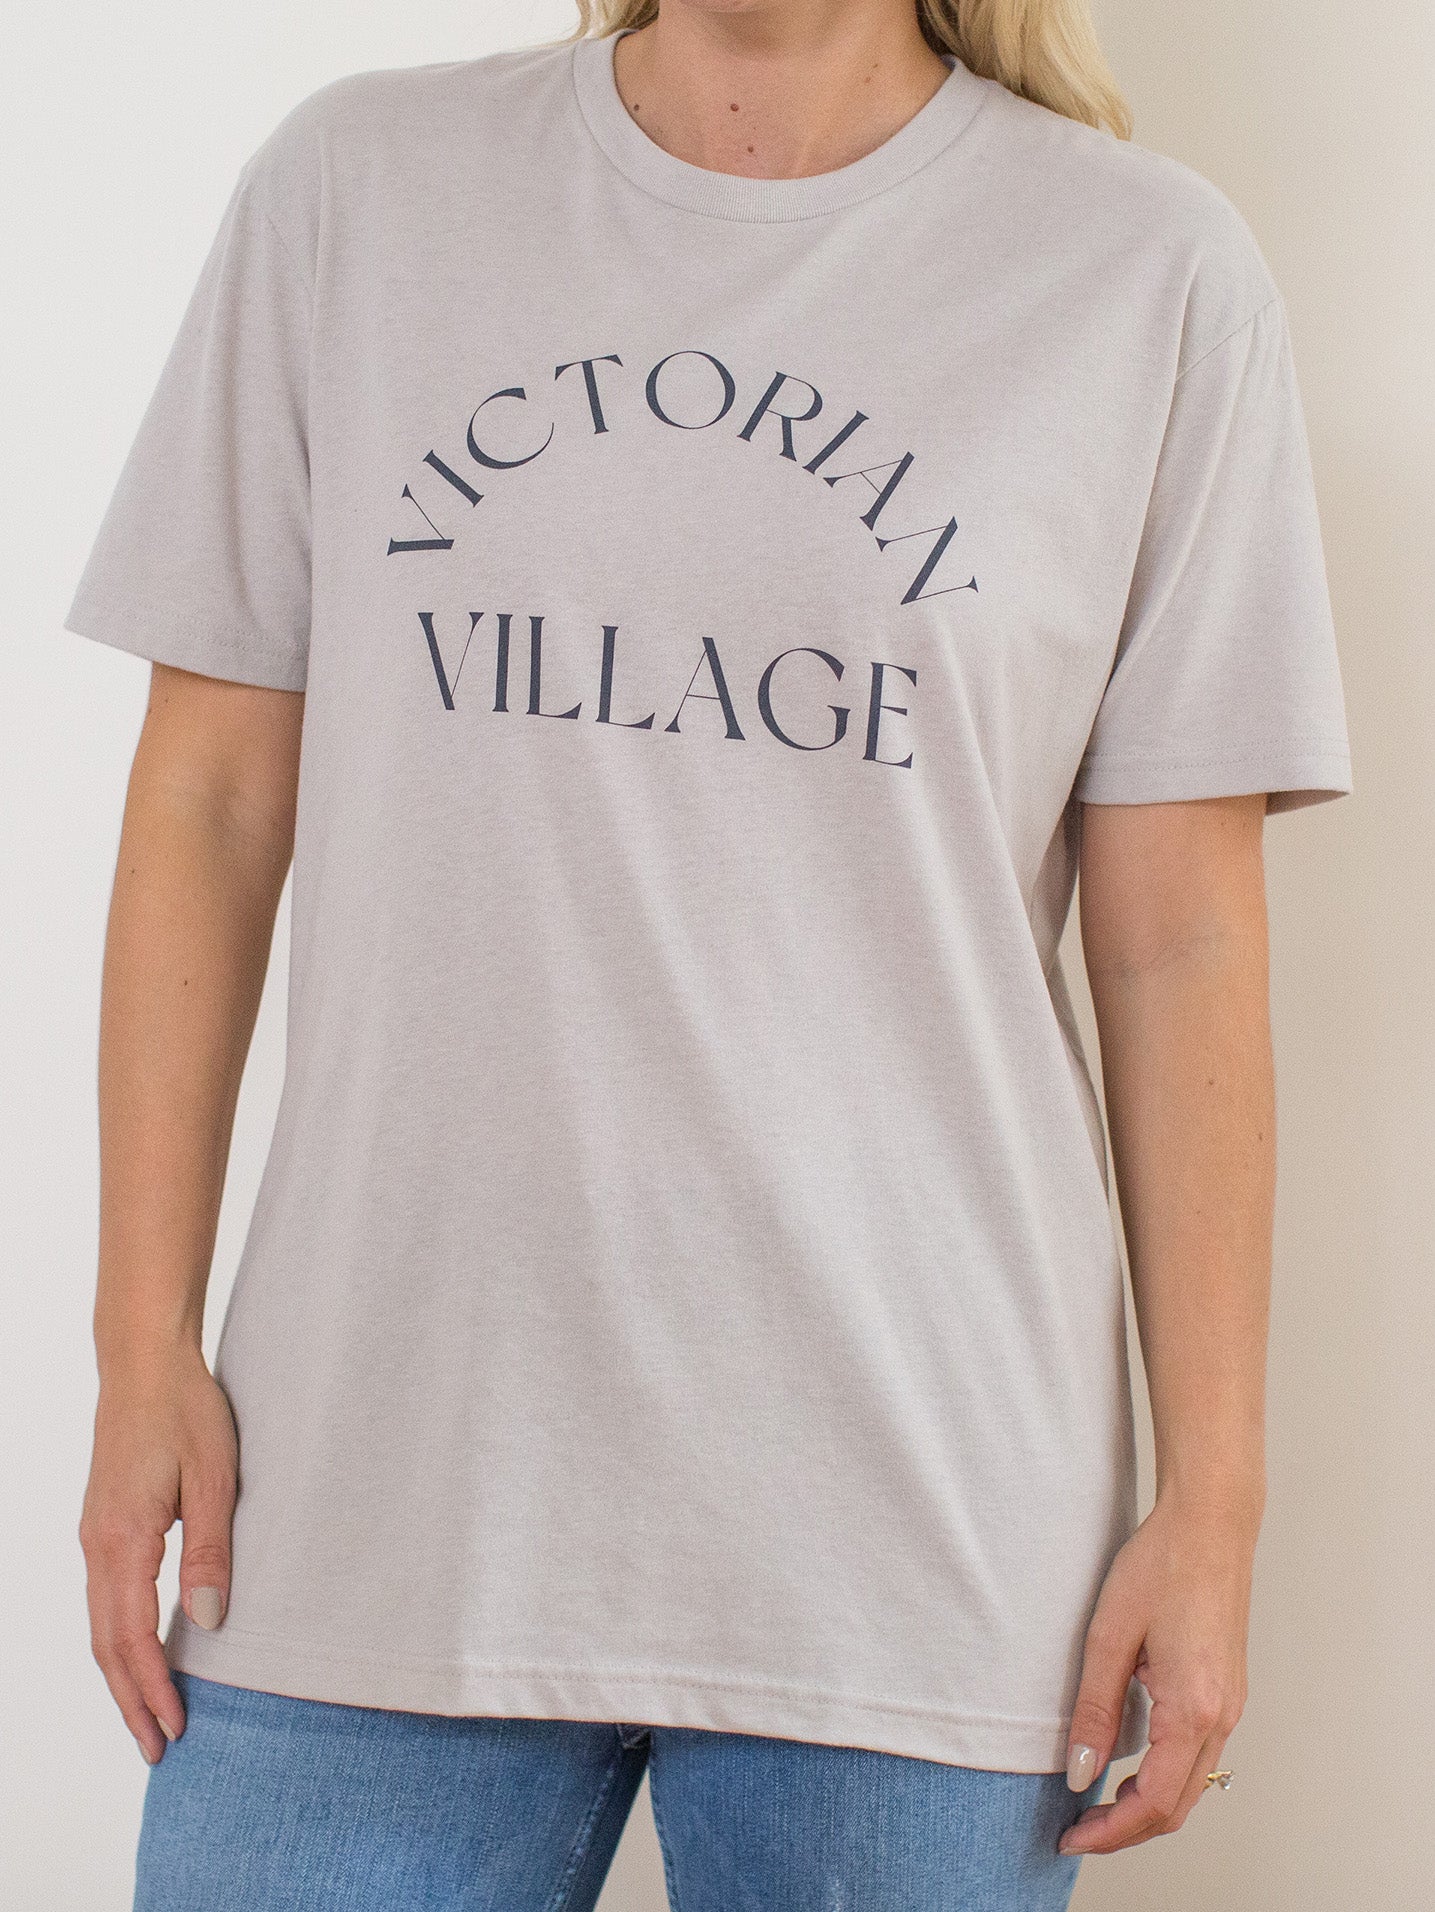 Model wearing light grey sueded crewneck tee with Victorian Village Columbus, Ohio graphic at front